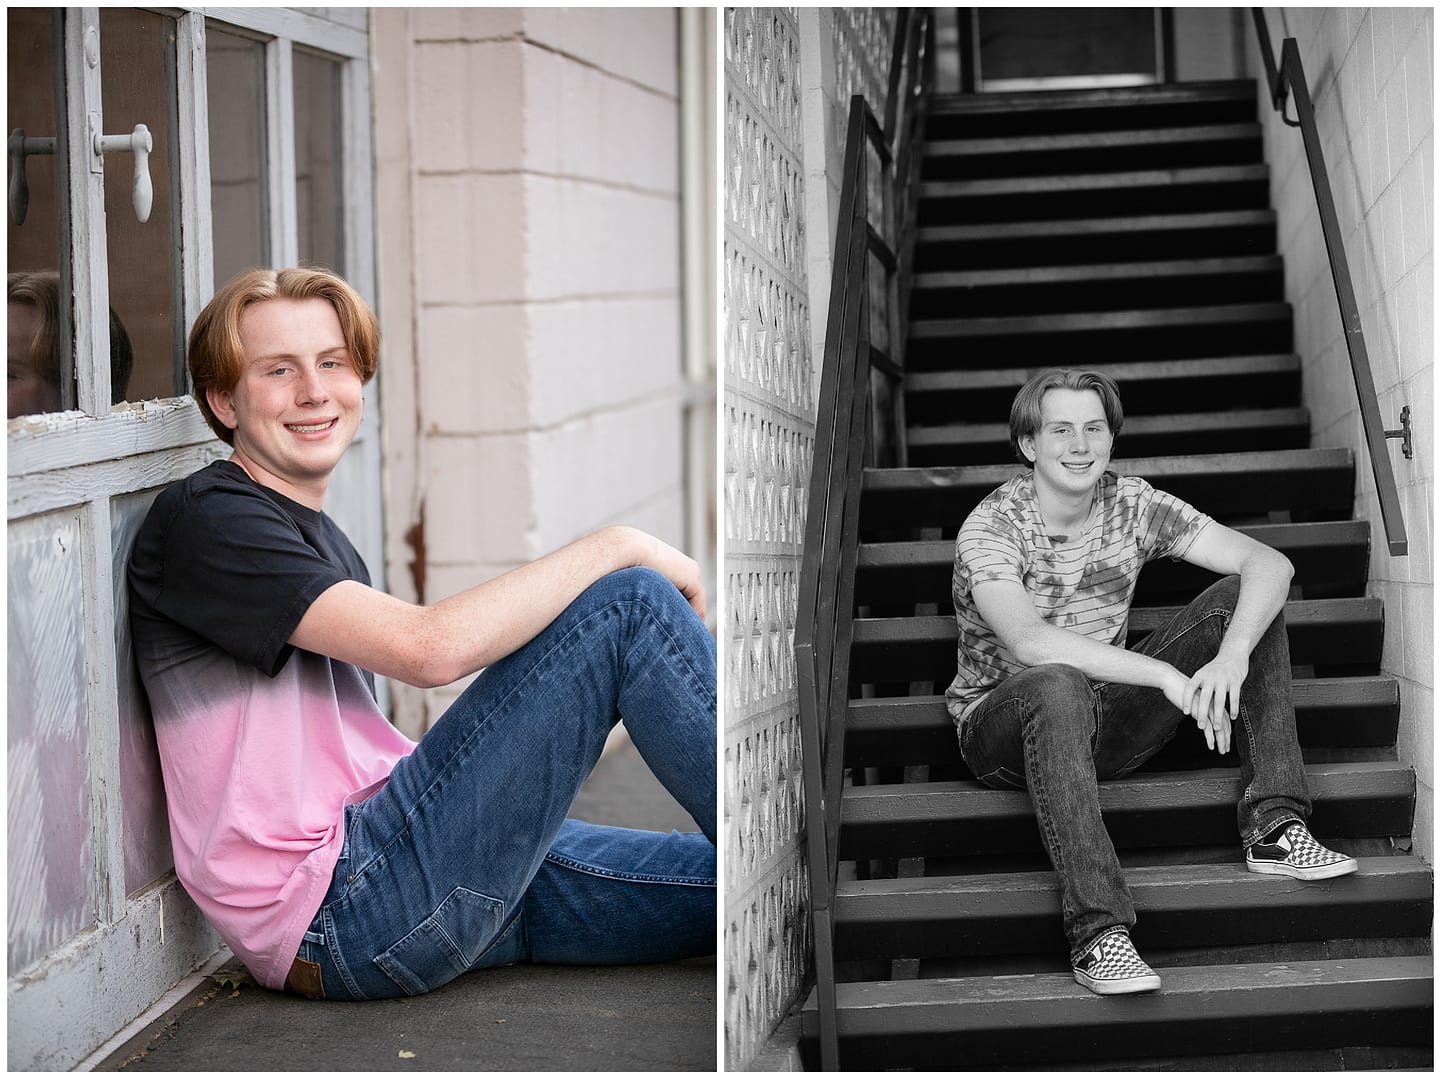 Teen boy poses on set of stairs. Photos by Tiffany Hix Photography.